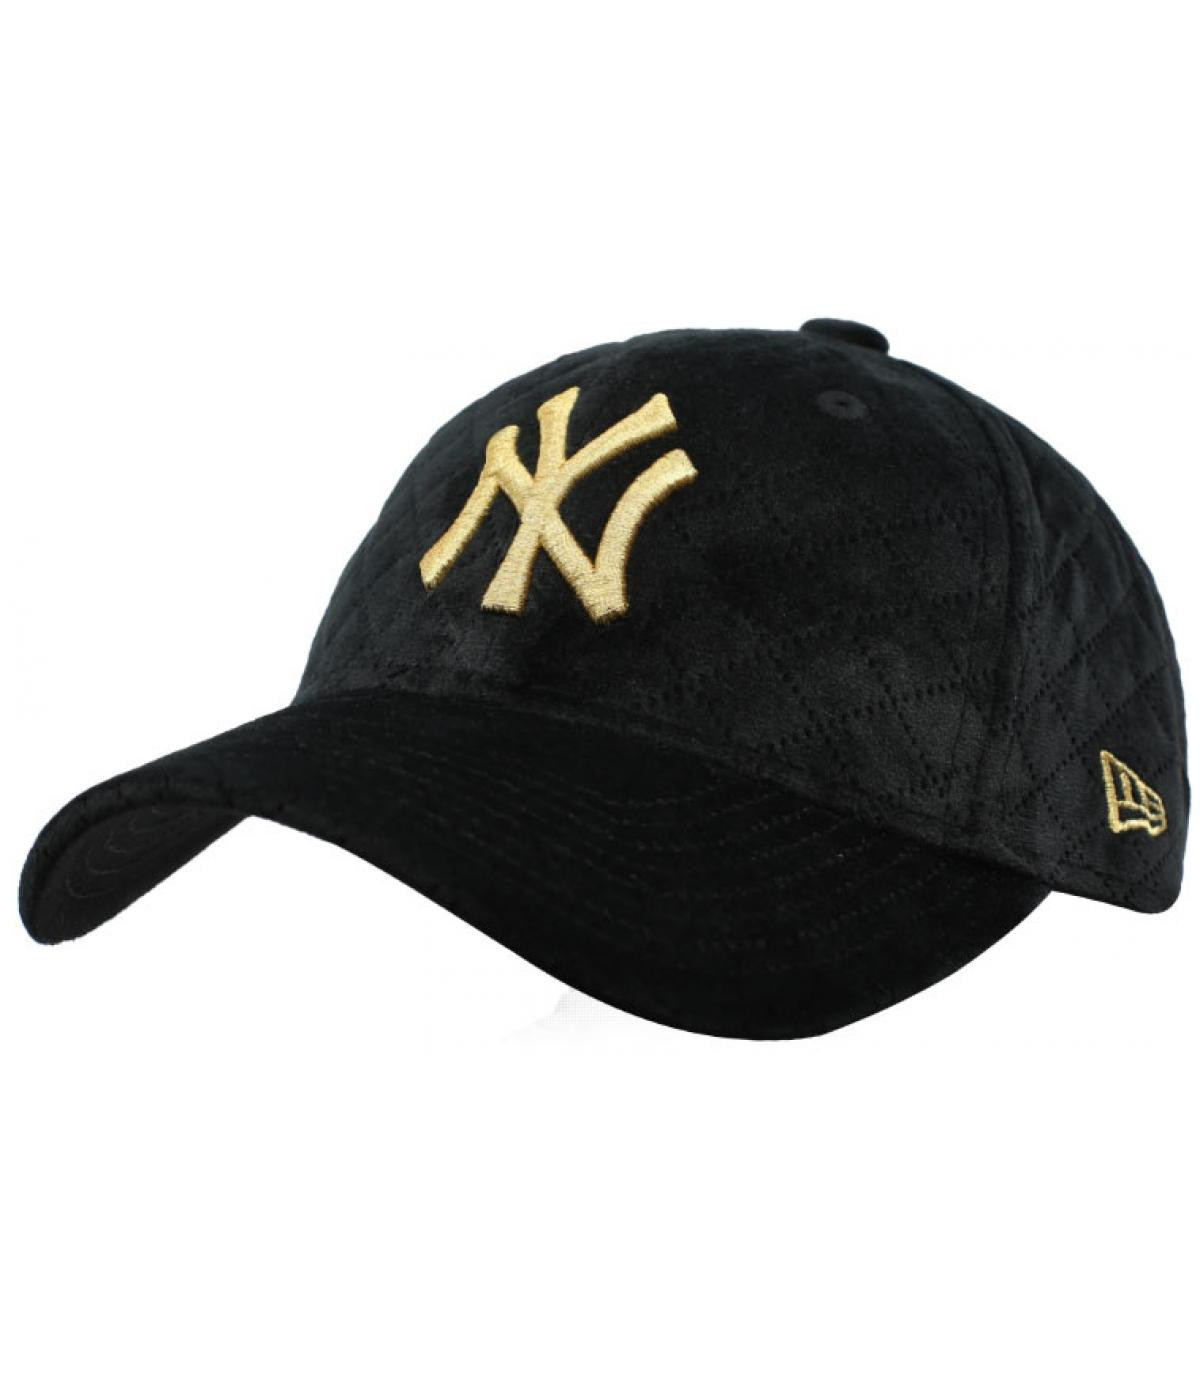 Casquette Wmns Winter Pack NY 9Forty black gold New Era